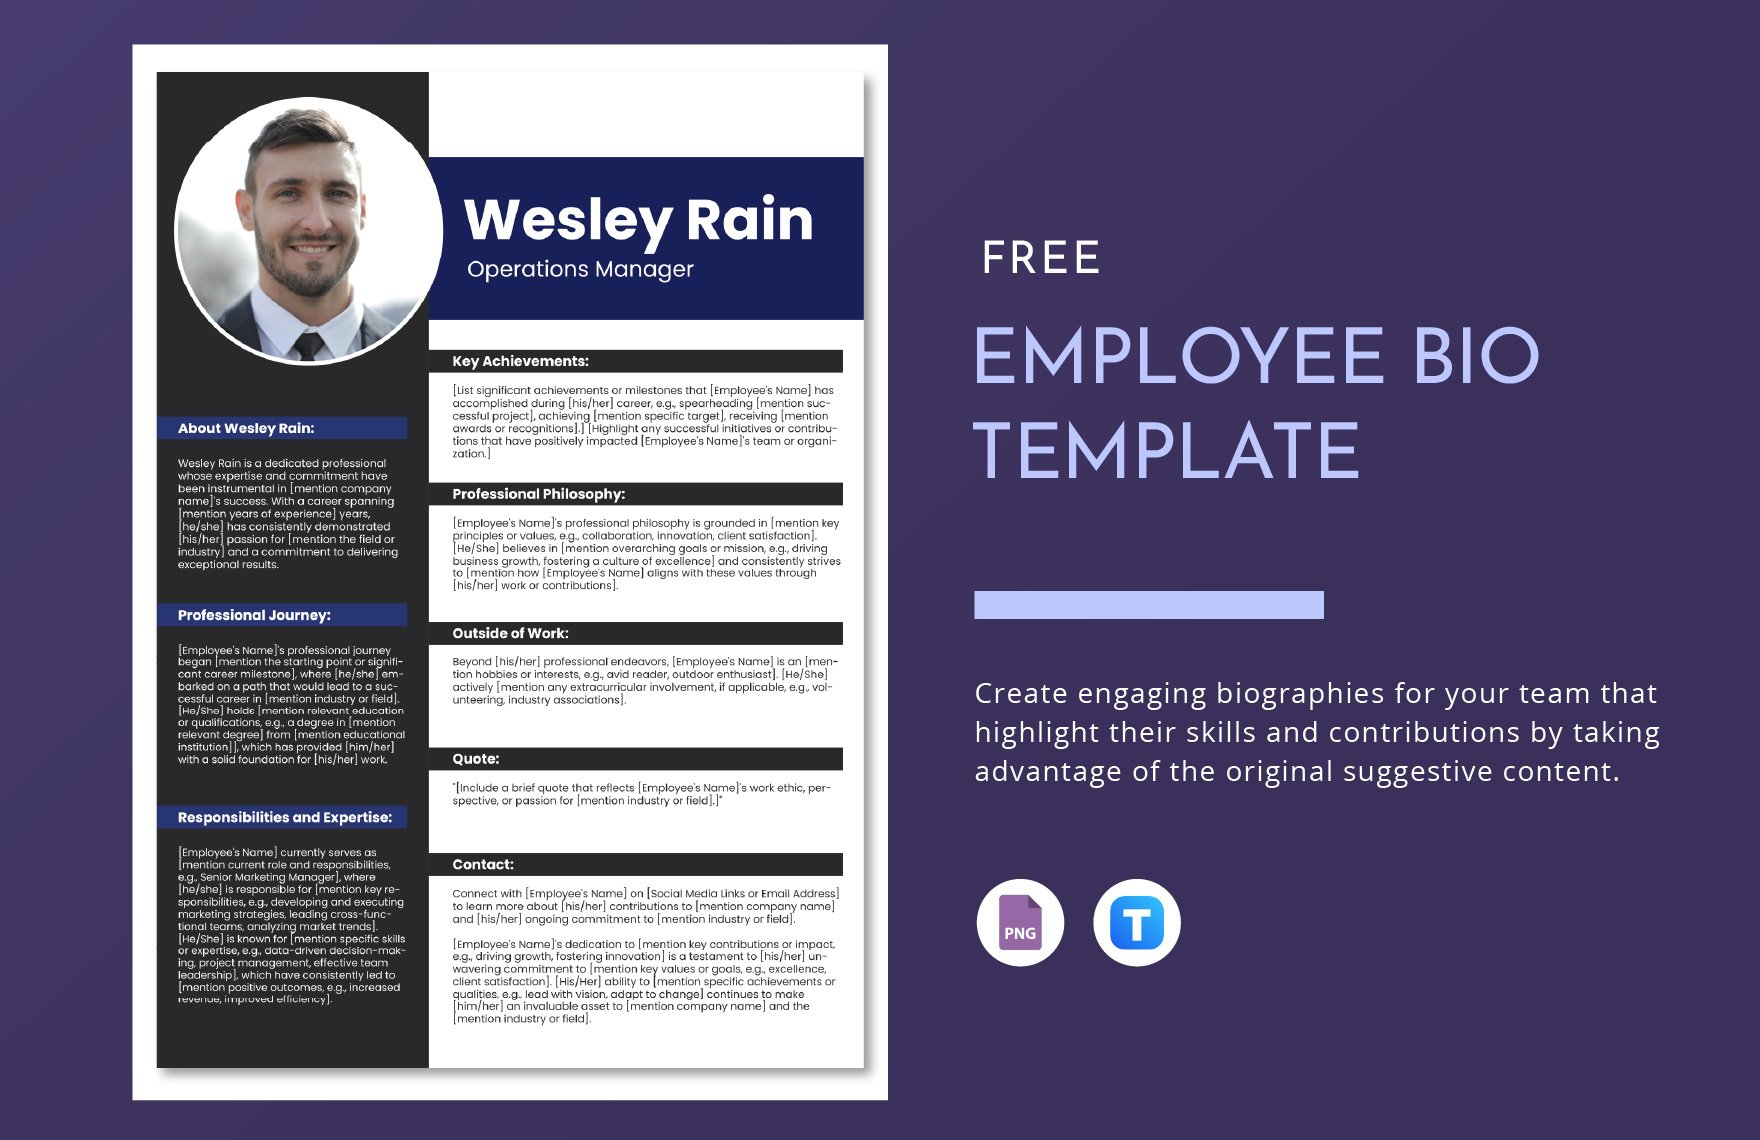 Free Employee Bio Template in PNG